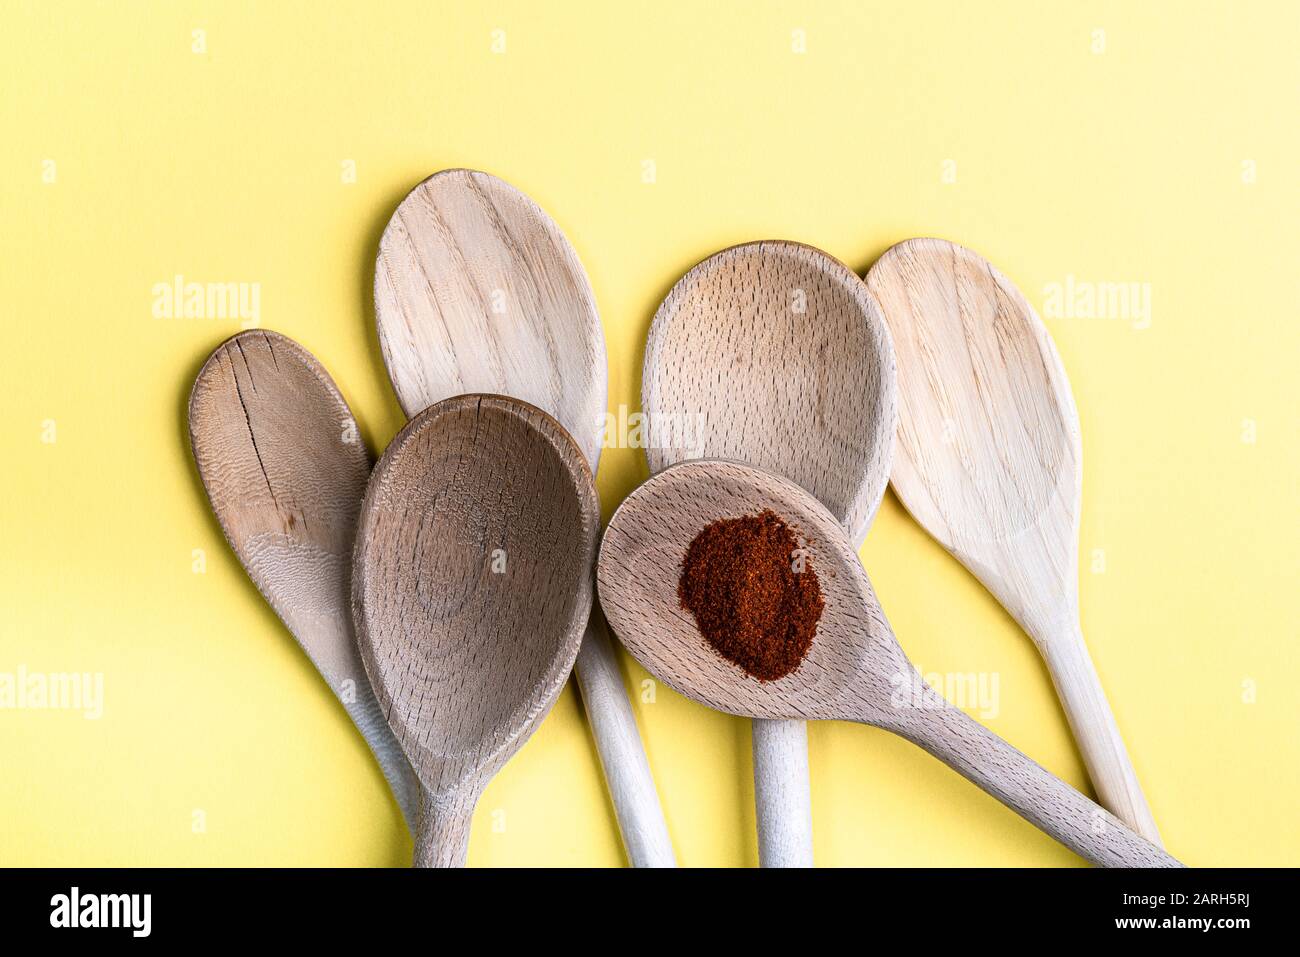 Group of old wooden spoons isolated on a pale cream background. One with some paprika. Stock Photo